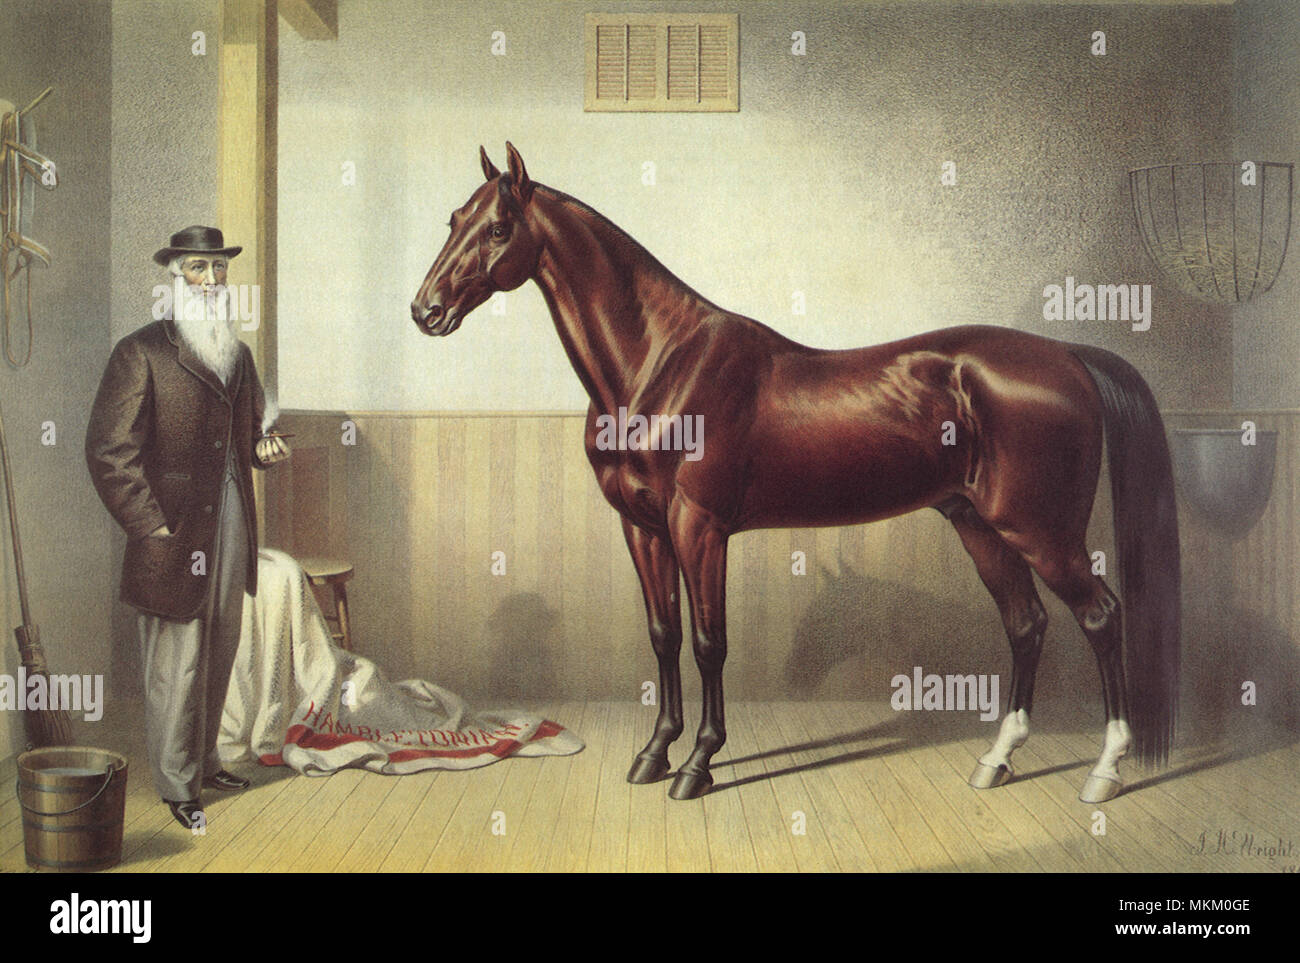 Horse and Man in Stall Stock Photo